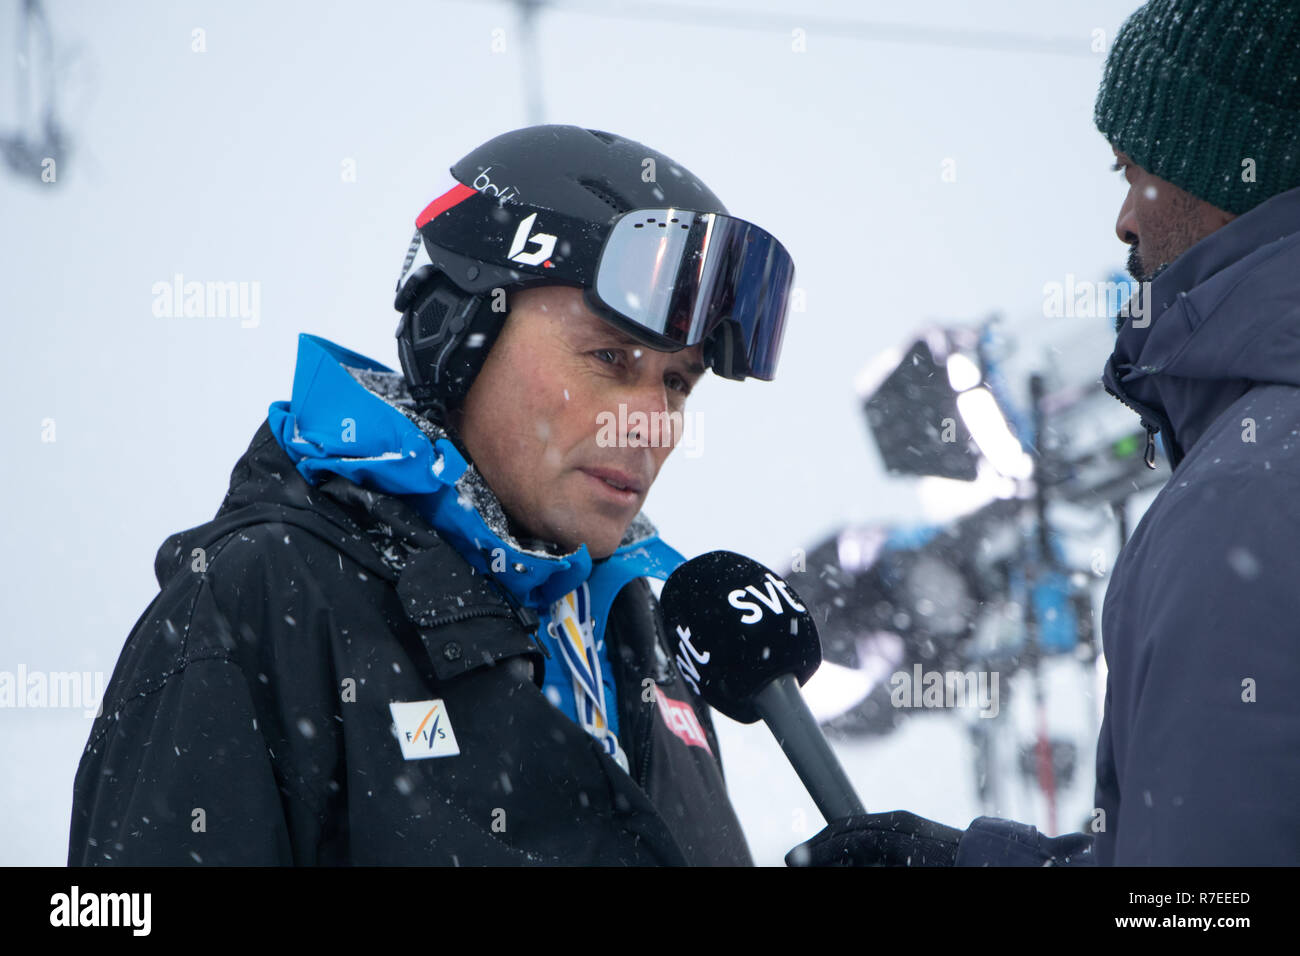 09 December 2018, Val d'Isère France. Markus Waldner of the FIS Alpine Skiing  Ski World Cup Federation talks about the cancellation of the slalom race  Stock Photo - Alamy